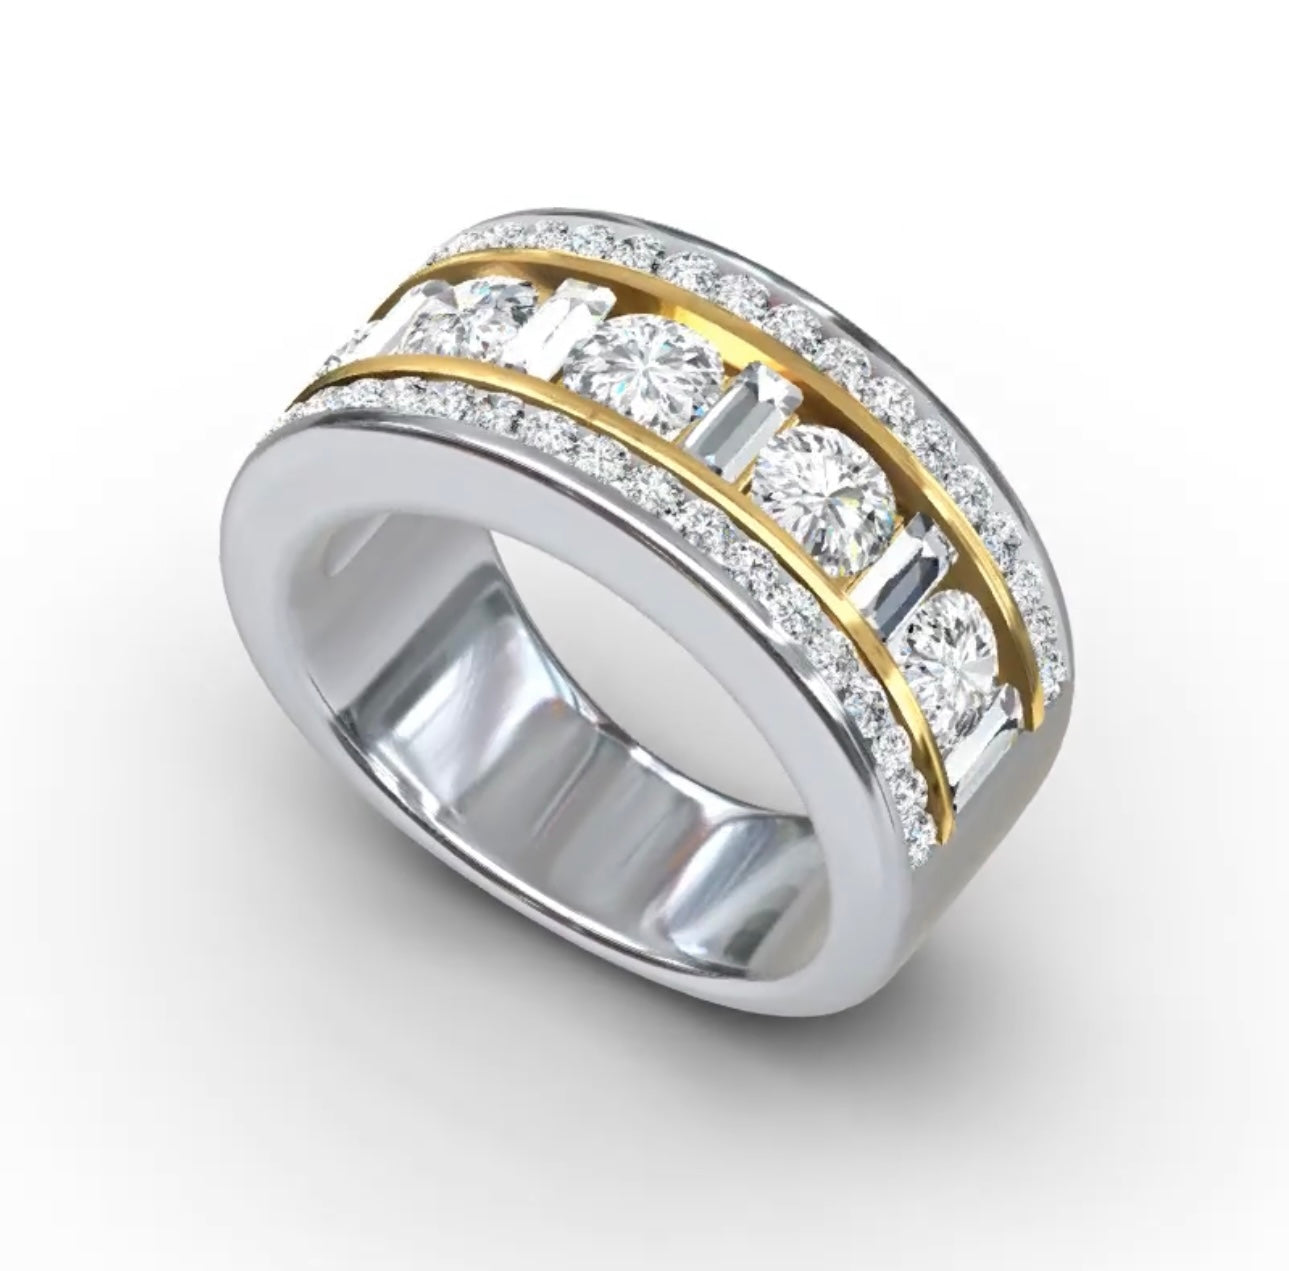 A two-toned diamond ring channel set named "Arabella"